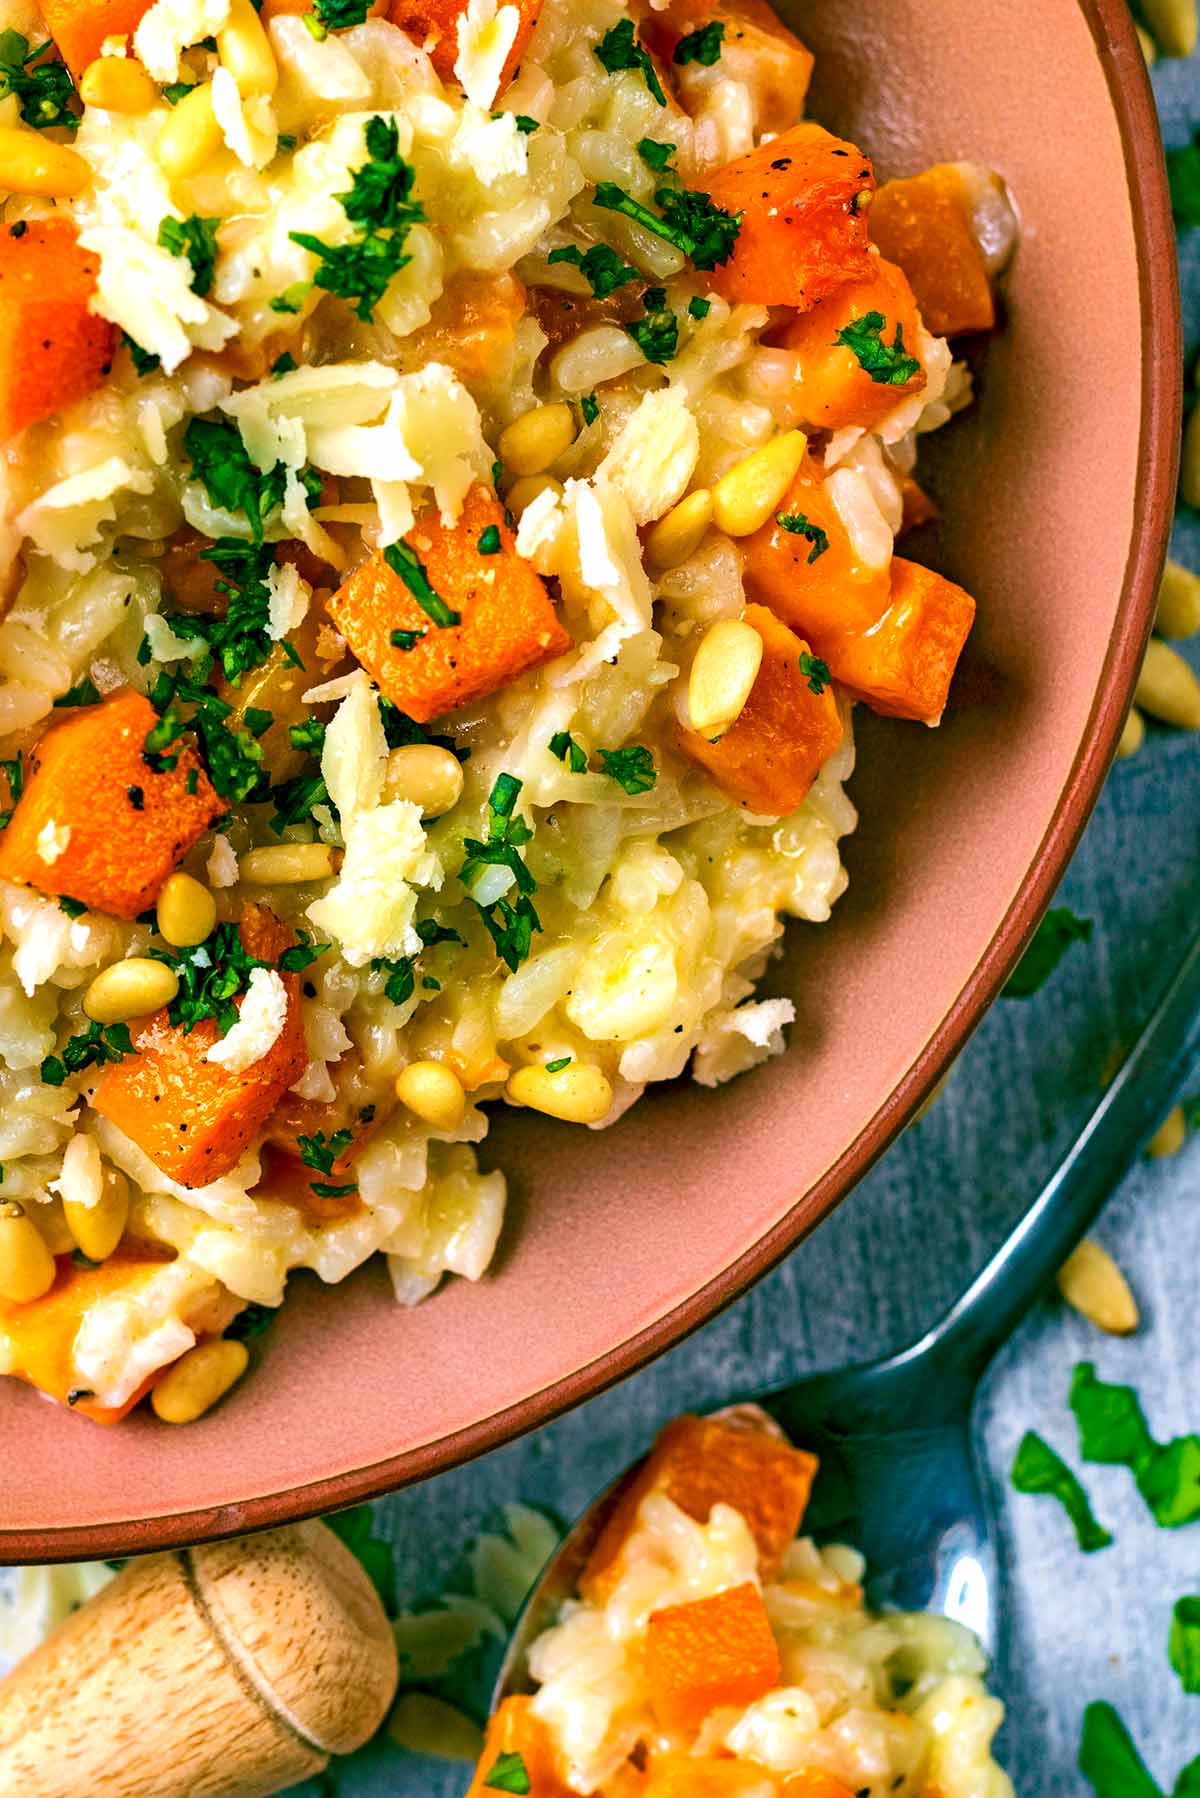 Cubes of butternut squash in a risotto with chopped herbs.